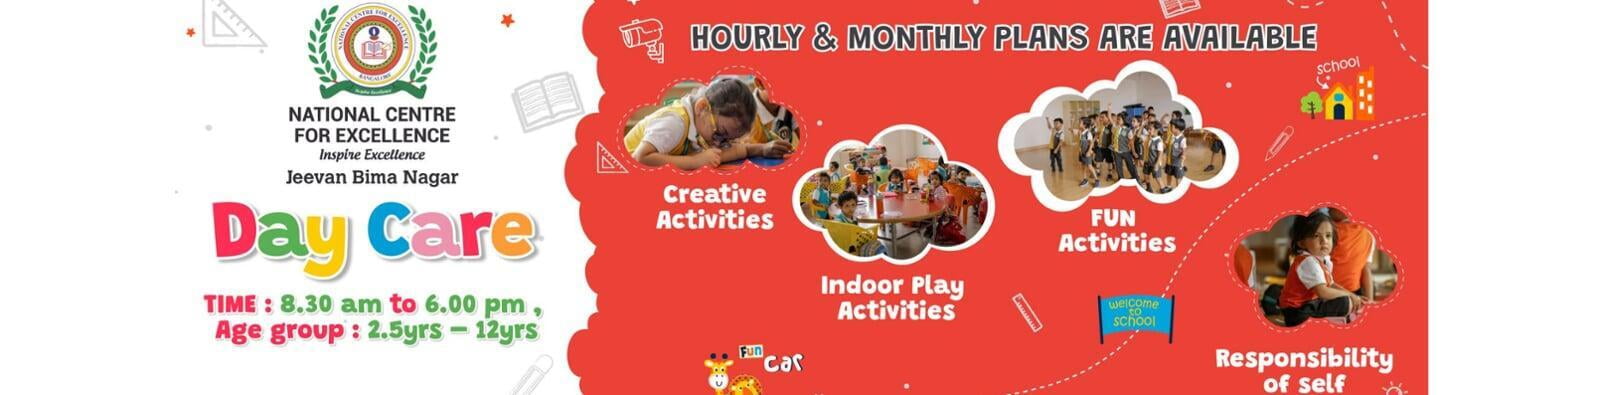 National Centre for Excellence - Jeevan Bhima Nagar Daycare and Playschool